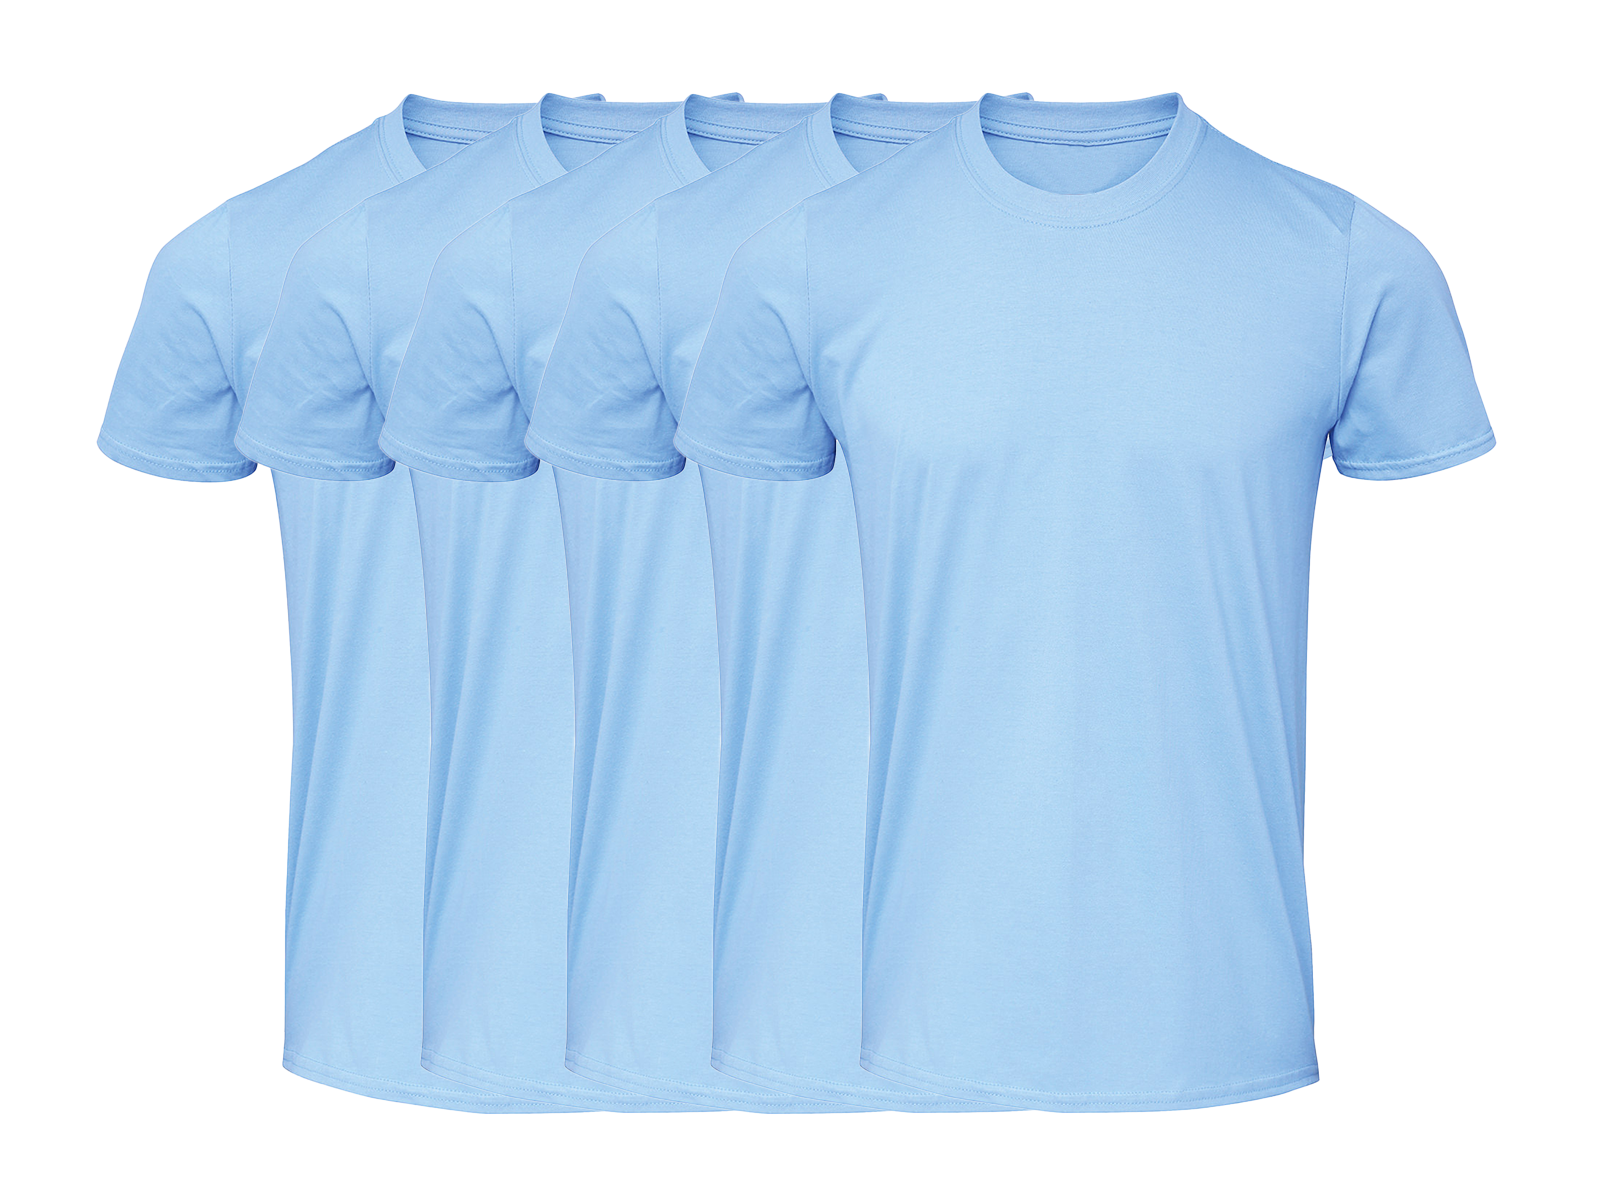 COOZO Mens Soft Cotton Pack of 5 Plain Short Sleeve T-Shirts - COOZO